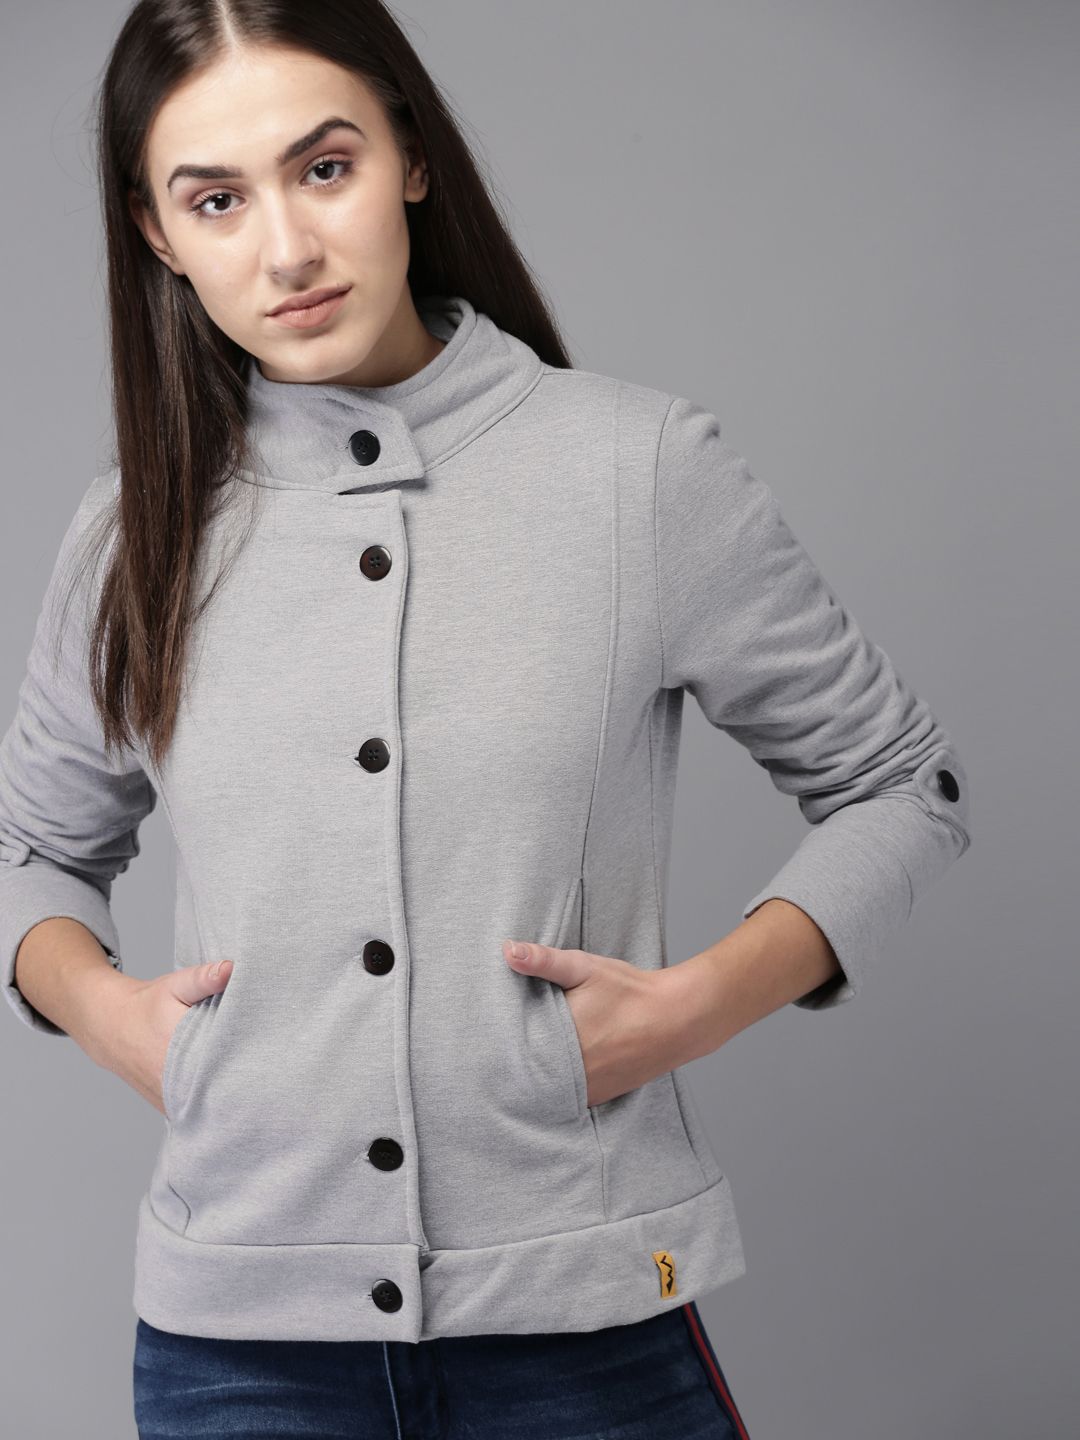 Campus Sutra Women Grey Solid Jacket Price in India